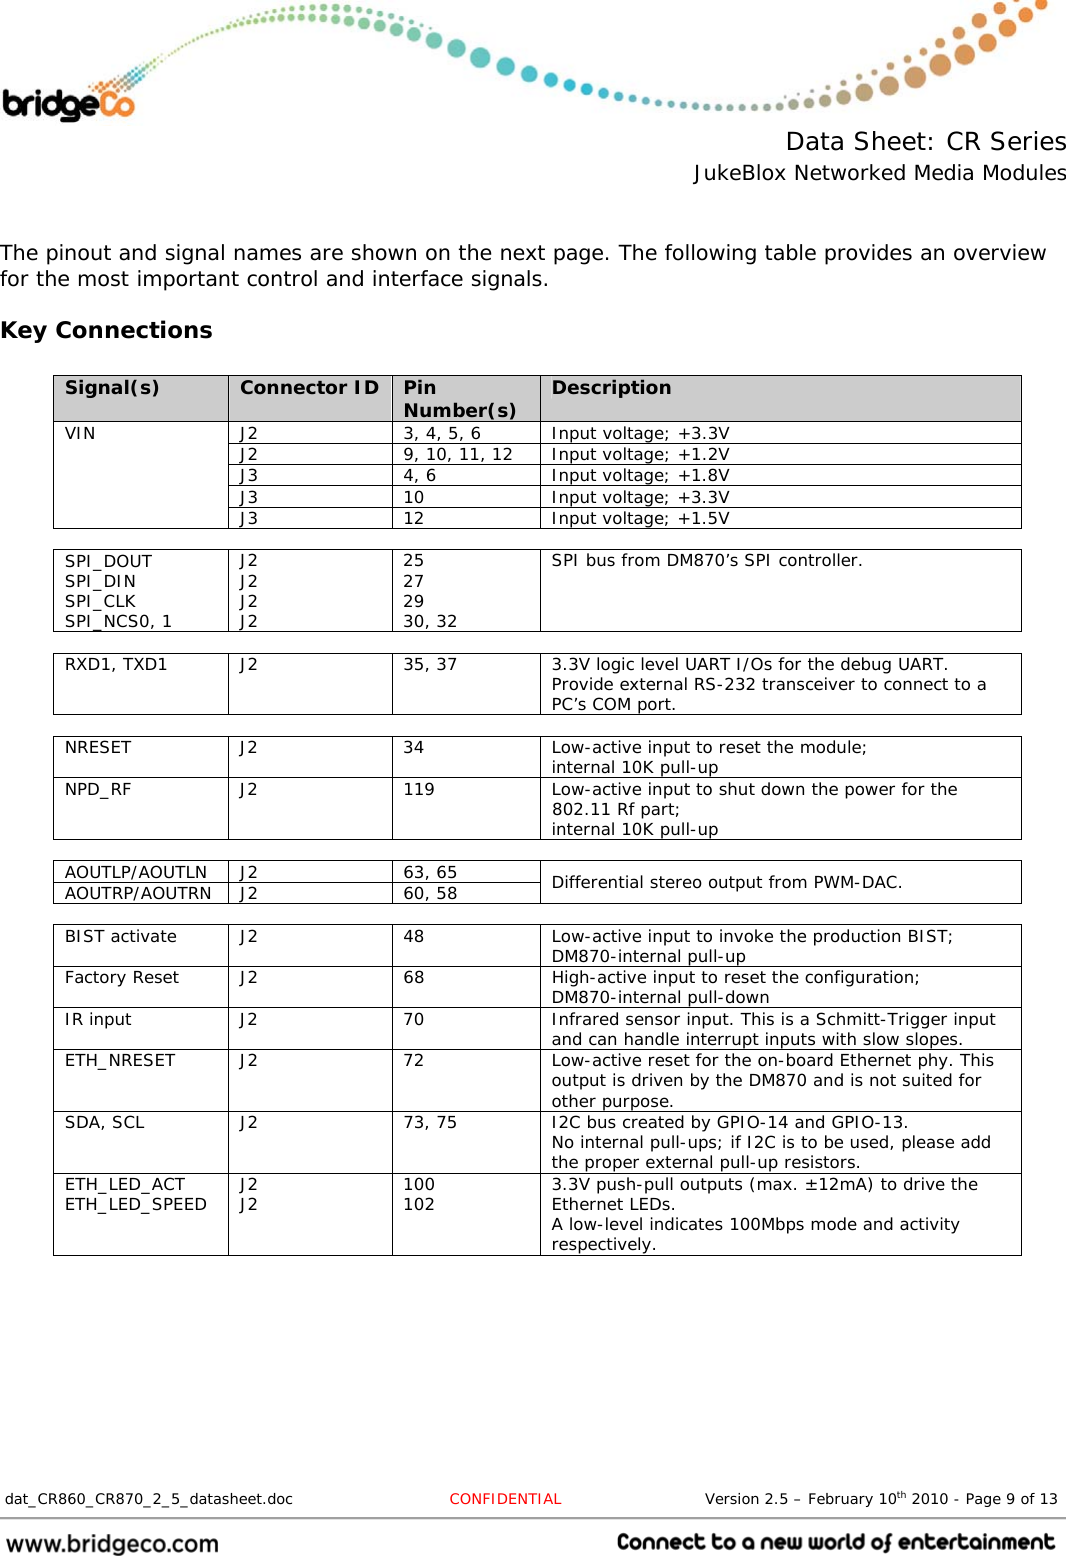  Data Sheet: CR Series JukeBlox Networked Media Modules  dat_CR860_CR870_2_5_datasheet.doc  CONFIDENTIAL                            Version 2.5 – February 10th 2010 - Page 9 of 13                                   The pinout and signal names are shown on the next page. The following table provides an overview for the most important control and interface signals. Key Connections  Signal(s)  Connector ID  Pin Number(s)  Description J2  3, 4, 5, 6  Input voltage; +3.3V J2  9, 10, 11, 12  Input voltage; +1.2V J3  4, 6  Input voltage; +1.8V J3 10 Input voltage; +3.3V VIN J3 12 Input voltage; +1.5V     SPI_DOUT SPI_DIN SPI_CLK SPI_NCS0, 1 J2 J2 J2 J2 25 27 29 30, 32 SPI bus from DM870’s SPI controller.     RXD1, TXD1  J2  35, 37  3.3V logic level UART I/Os for the debug UART. Provide external RS-232 transceiver to connect to a PC’s COM port.     NRESET  J2  34  Low-active input to reset the module; internal 10K pull-up NPD_RF  J2  119  Low-active input to shut down the power for the 802.11 Rf part; internal 10K pull-up     AOUTLP/AOUTLN J2  63, 65 AOUTRP/AOUTRN J2  60, 58  Differential stereo output from PWM-DAC.     BIST activate  J2  48  Low-active input to invoke the production BIST; DM870-internal pull-up Factory Reset  J2  68  High-active input to reset the configuration; DM870-internal pull-down IR input  J2  70  Infrared sensor input. This is a Schmitt-Trigger input and can handle interrupt inputs with slow slopes. ETH_NRESET  J2  72  Low-active reset for the on-board Ethernet phy. This output is driven by the DM870 and is not suited for other purpose. SDA, SCL  J2  73, 75  I2C bus created by GPIO-14 and GPIO-13. No internal pull-ups; if I2C is to be used, please add the proper external pull-up resistors. ETH_LED_ACT ETH_LED_SPEED  J2 J2  100 102  3.3V push-pull outputs (max. ±12mA) to drive the Ethernet LEDs. A low-level indicates 100Mbps mode and activity respectively.  